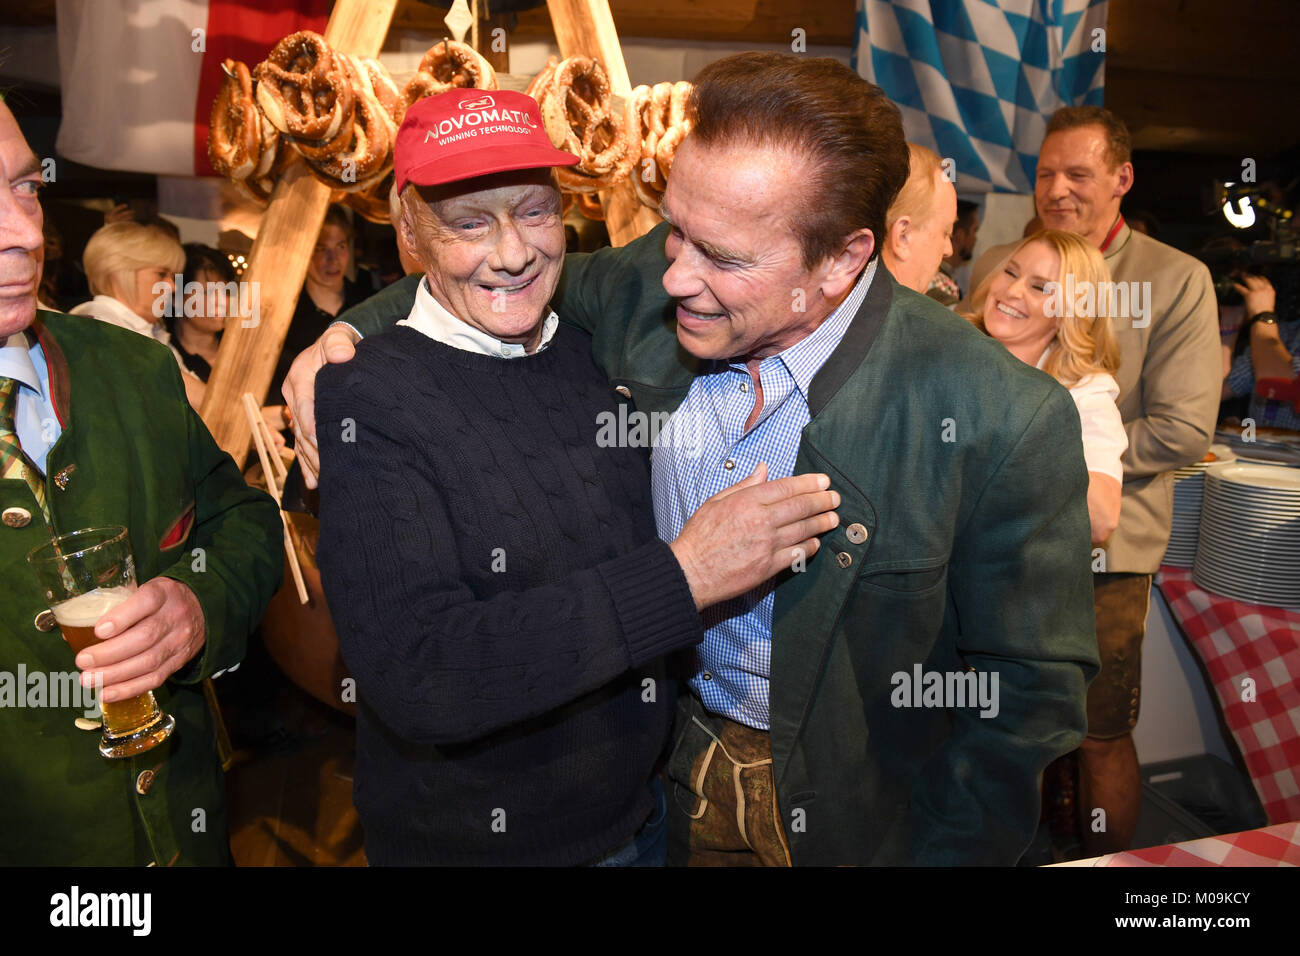 Going, Germany. 19th Jan, 2018. Former formula one driver Niki Lauda (L)  and actor Arnold Schwarzenegger attend the 27th traditional 'Weißwurst  party' (lit. Bavarian white sausage party) at the Stanglwirt Inn in